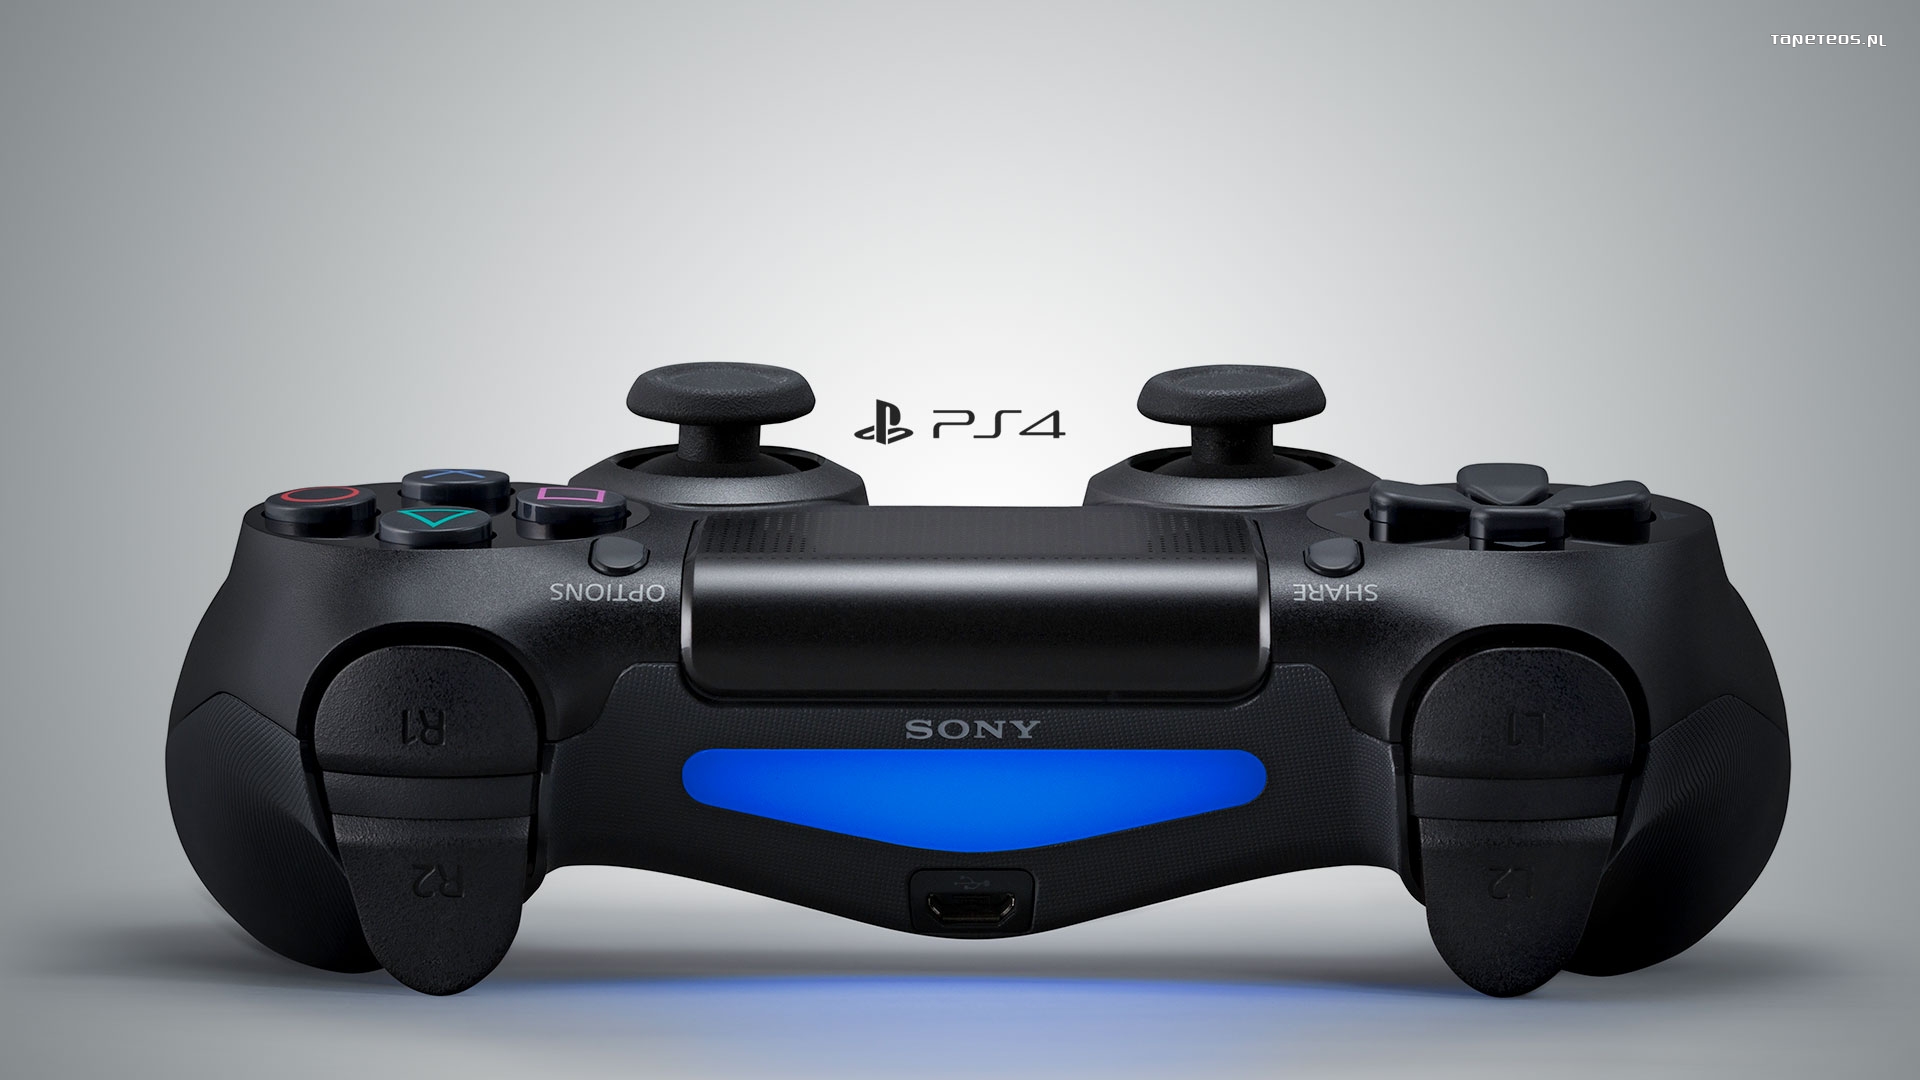 Sony Playstation 4 007 Pad, Controller